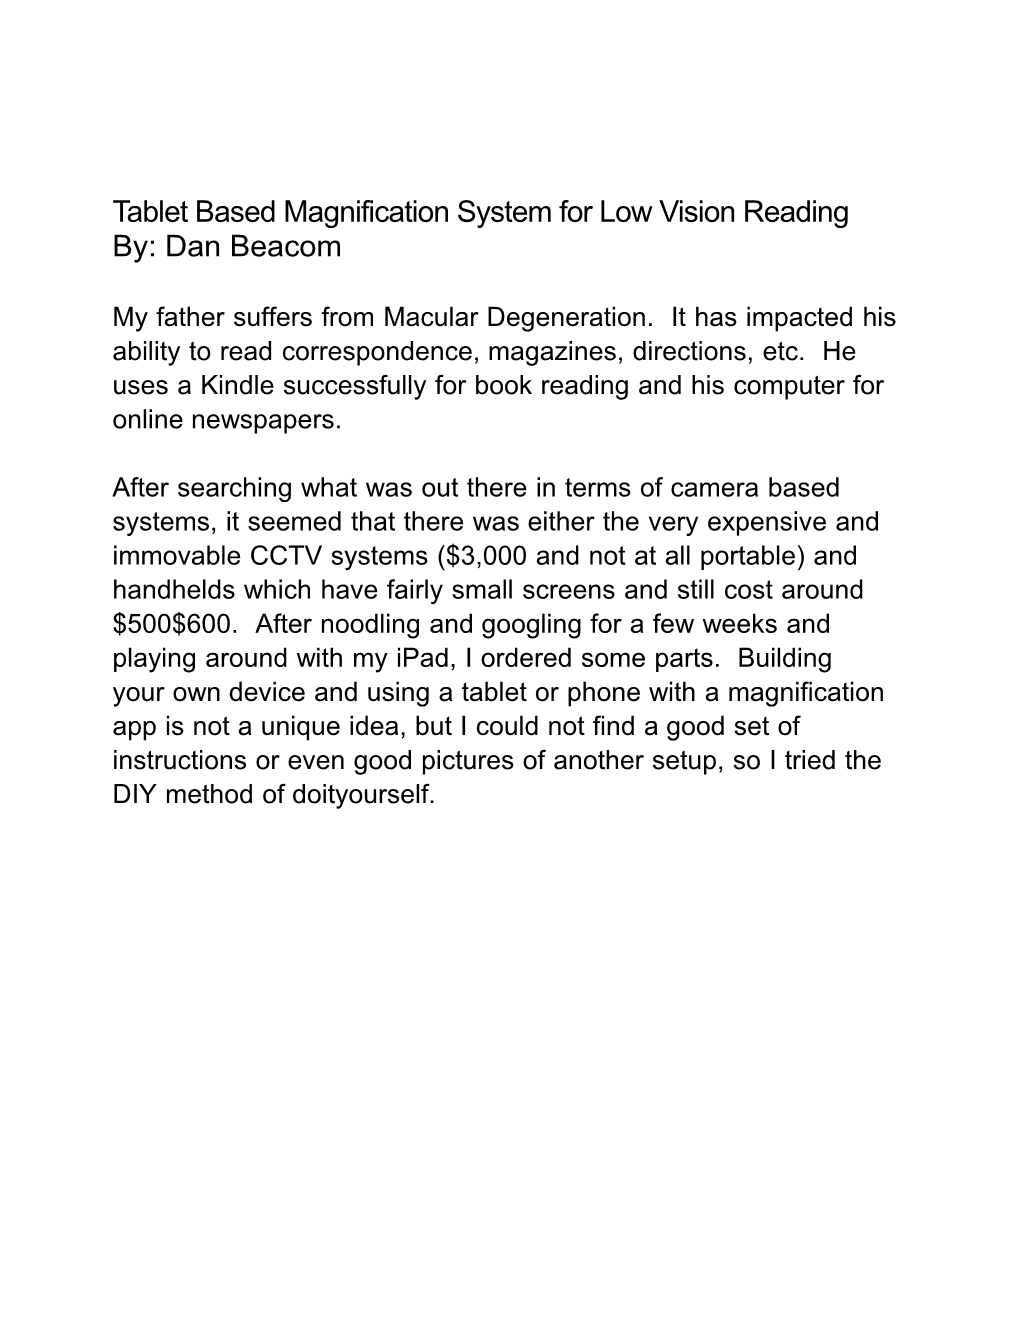 Tablet Based Magnification System for Low Vision Reading